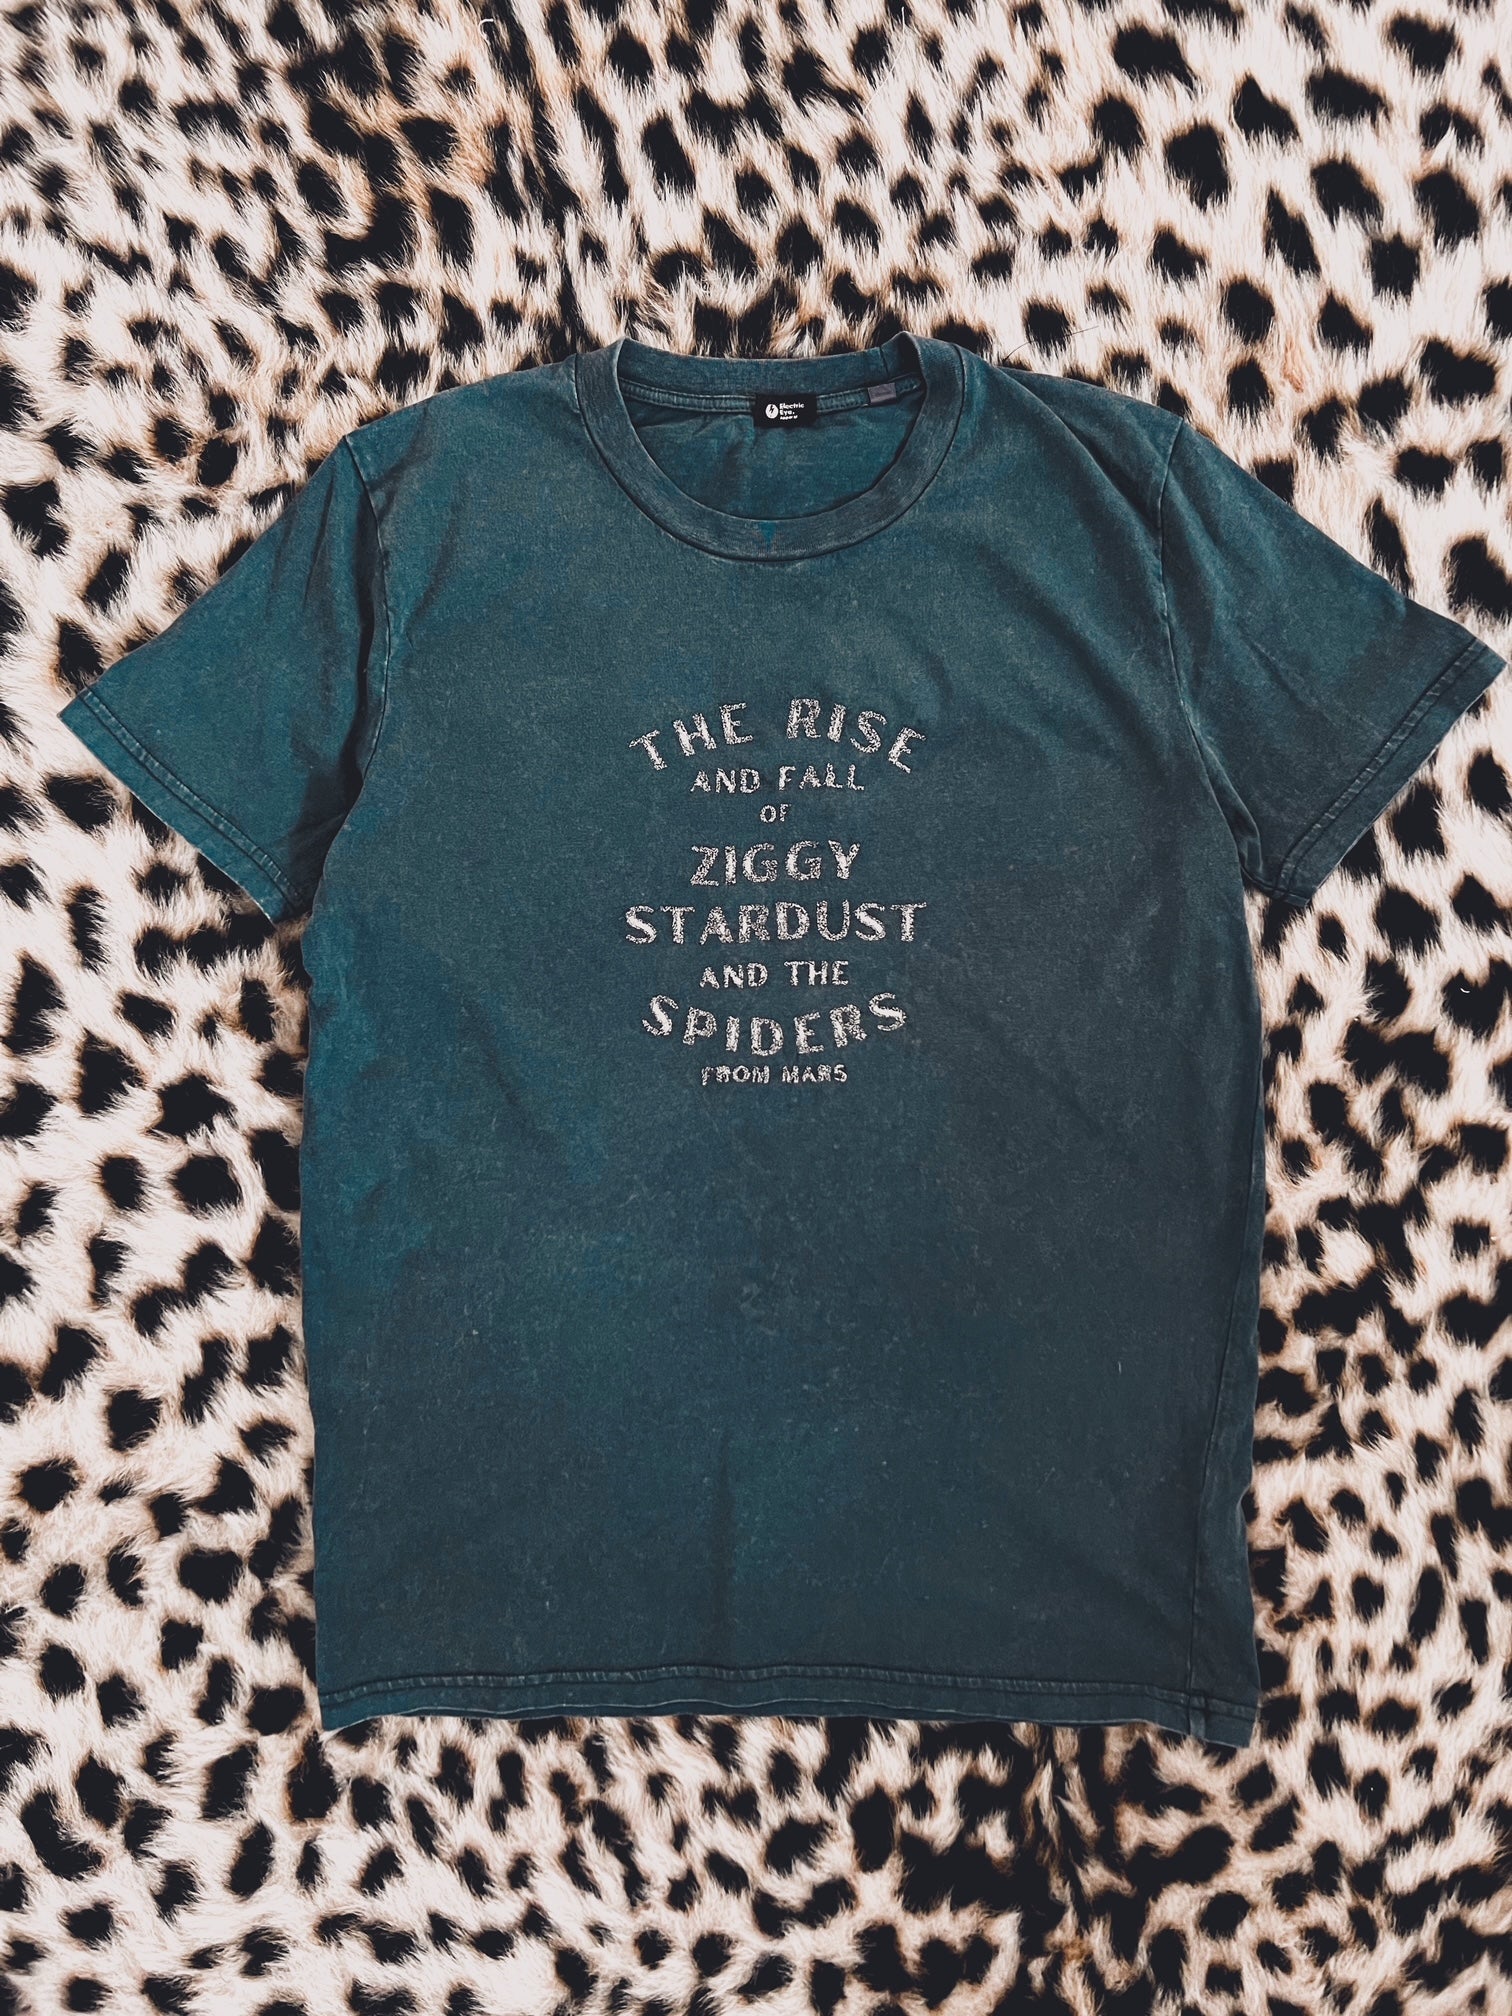 'THE RISE AND FALL OF ZIGGY STARDUST AND THE SPIDERS FROM MARS’ EMBROIDERED UNISEX VINTAGE GARMENT DYED ORGANIC COTTON T-SHIRT